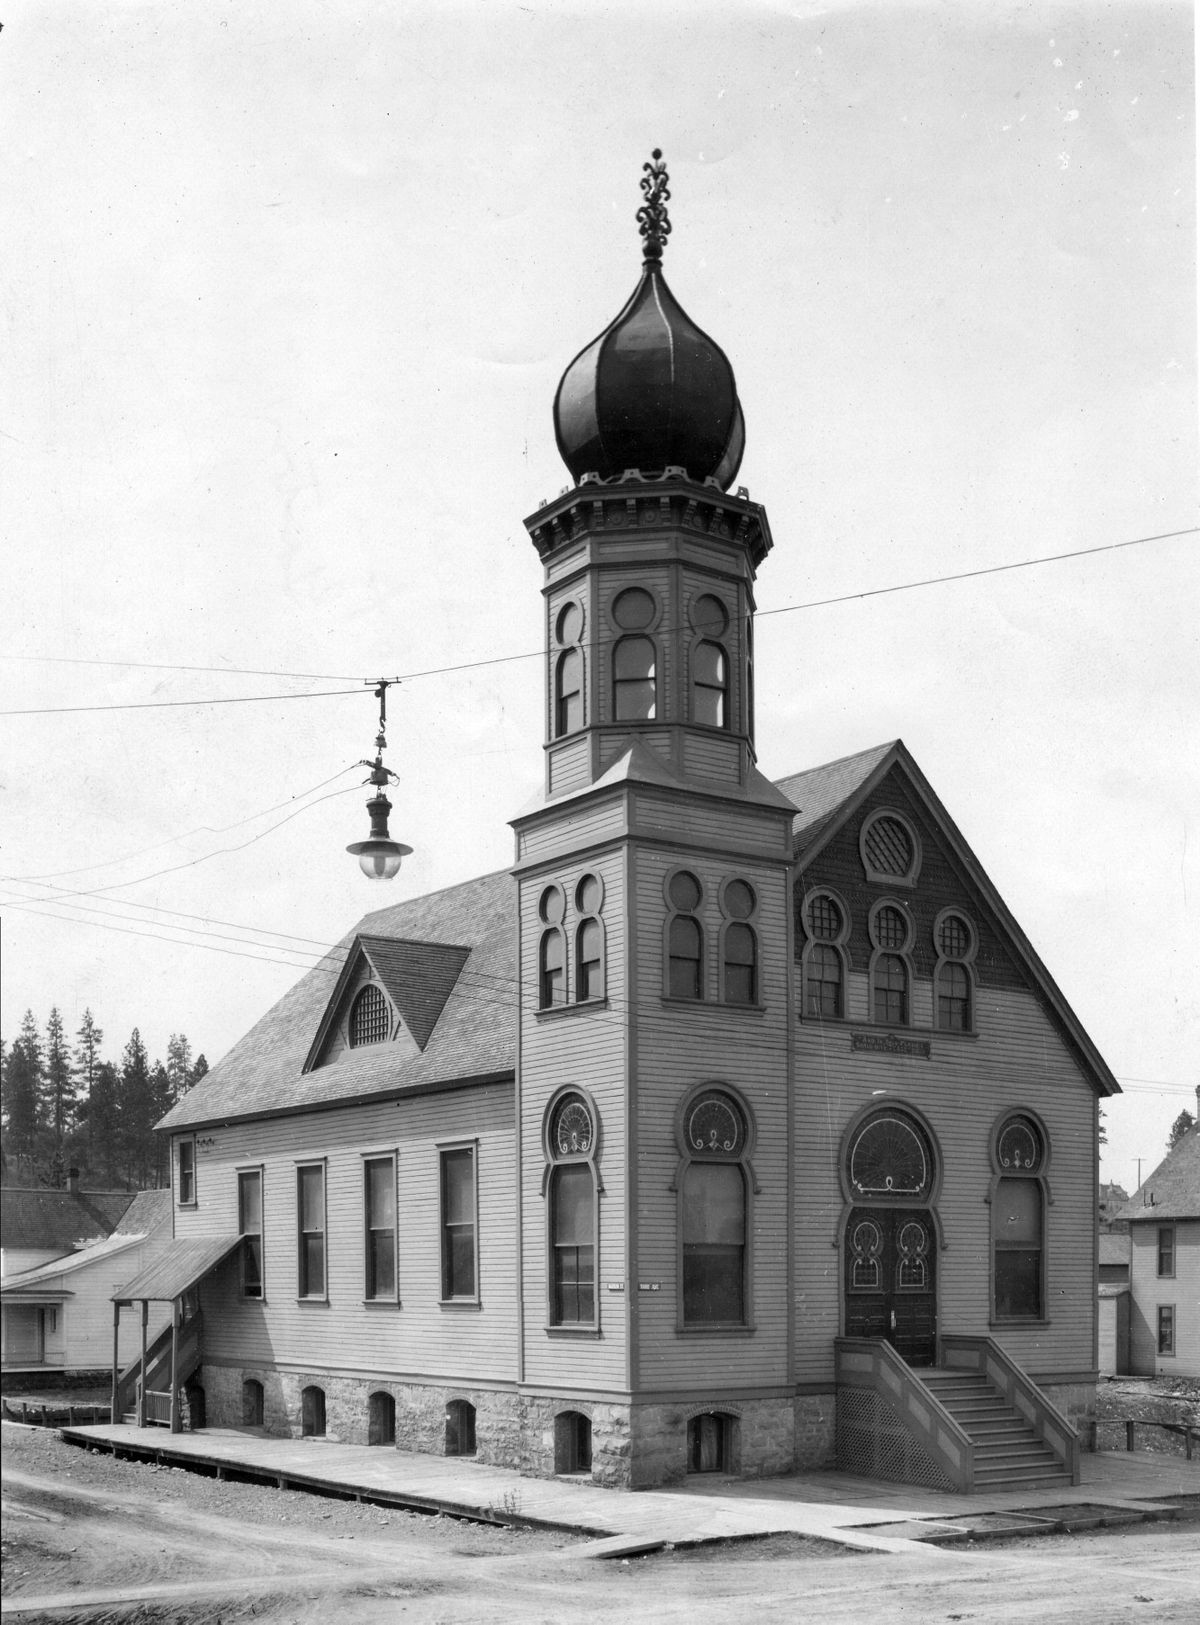 Temple Emanuel, built in 1892 by Herman Preusse, was the first Jewish synagogue built in the state of Washington. It was a frame structure with stone foundation, and was dedicated at Third Avenue and Madison Street, just four days before Seattle opened its first synagogue. Temple Emanuel stood until 1934, and a plaque commemorating its significance now stands in place by the wall of the car dealership that now occupies that location. (The Spokesman Review)